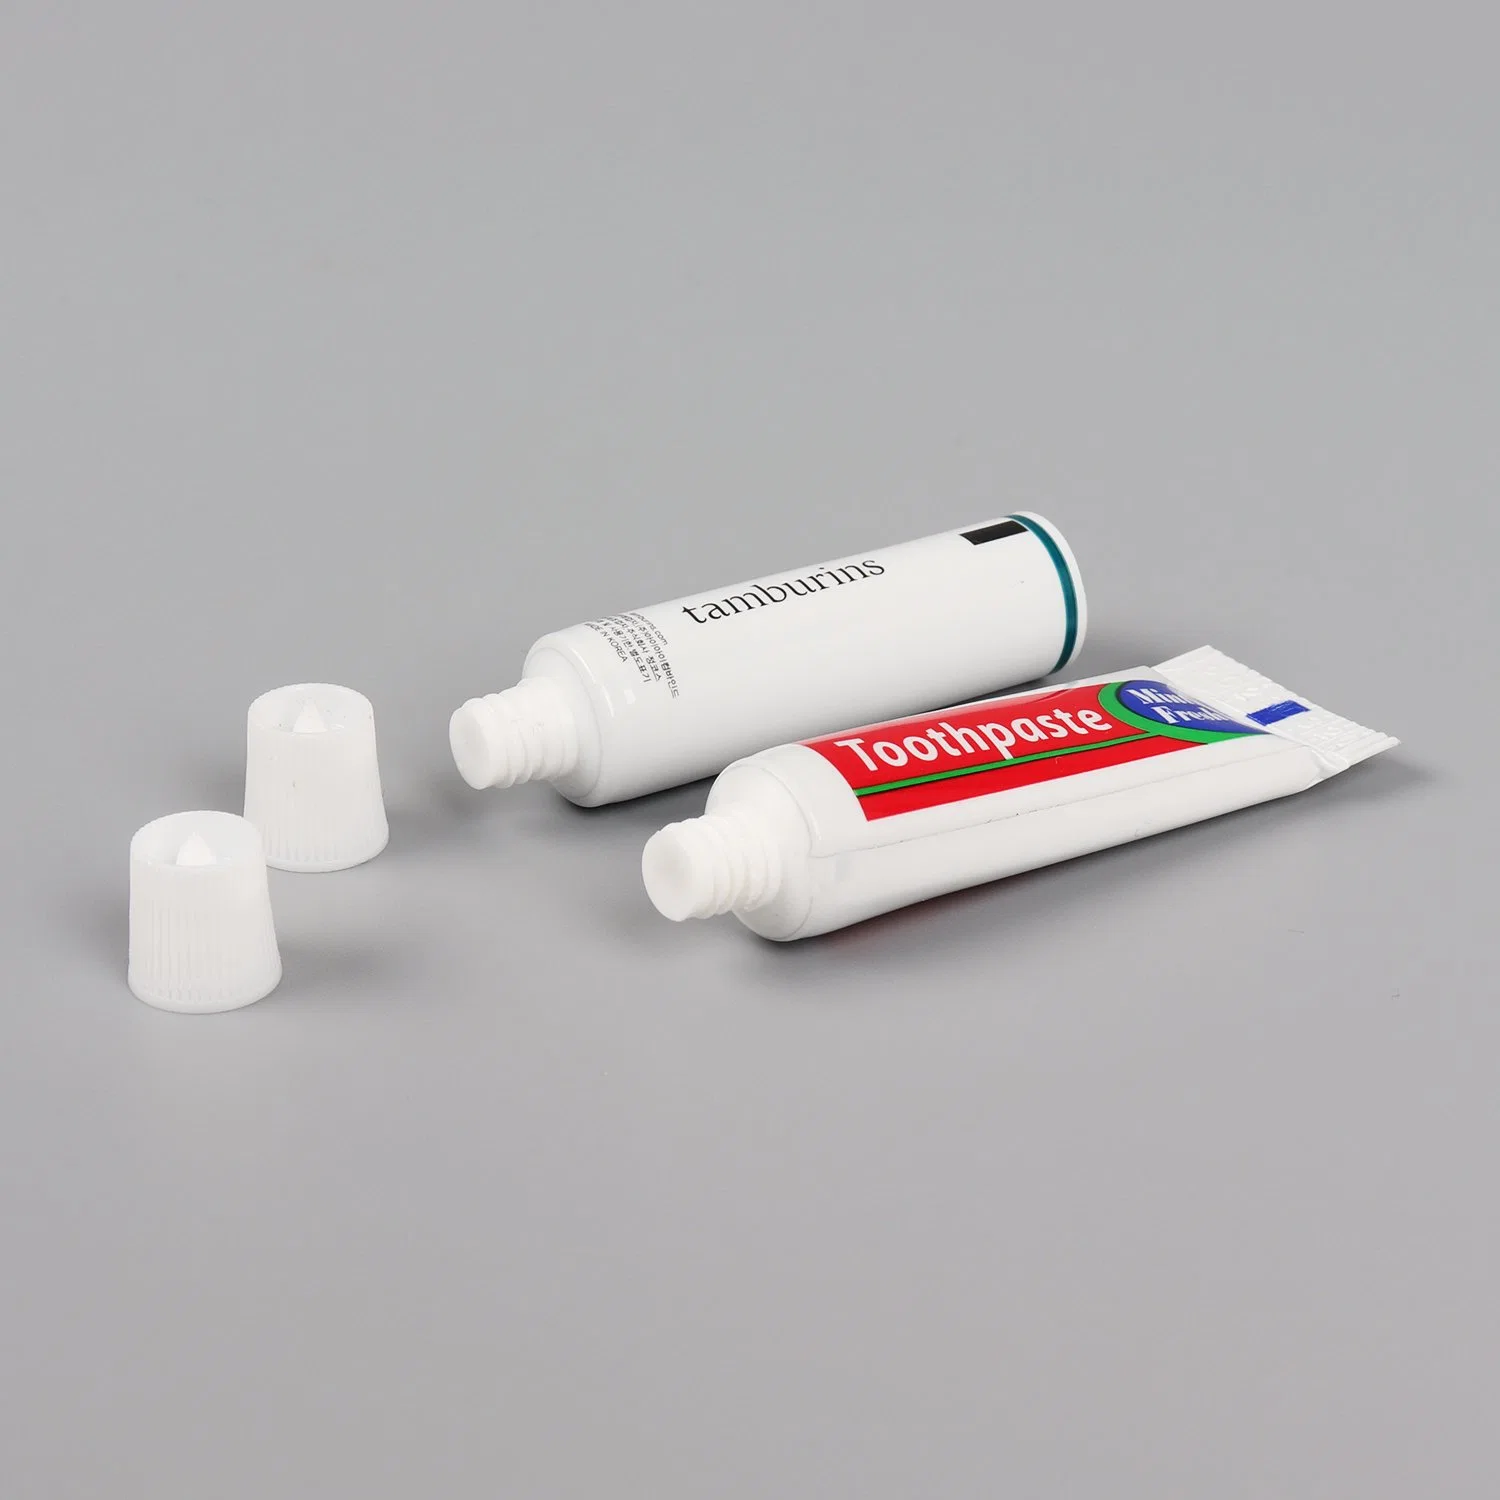 China Supplier Small Mini Size 3G Aluminum Laminated Tube Toothpaste Tube Packaging